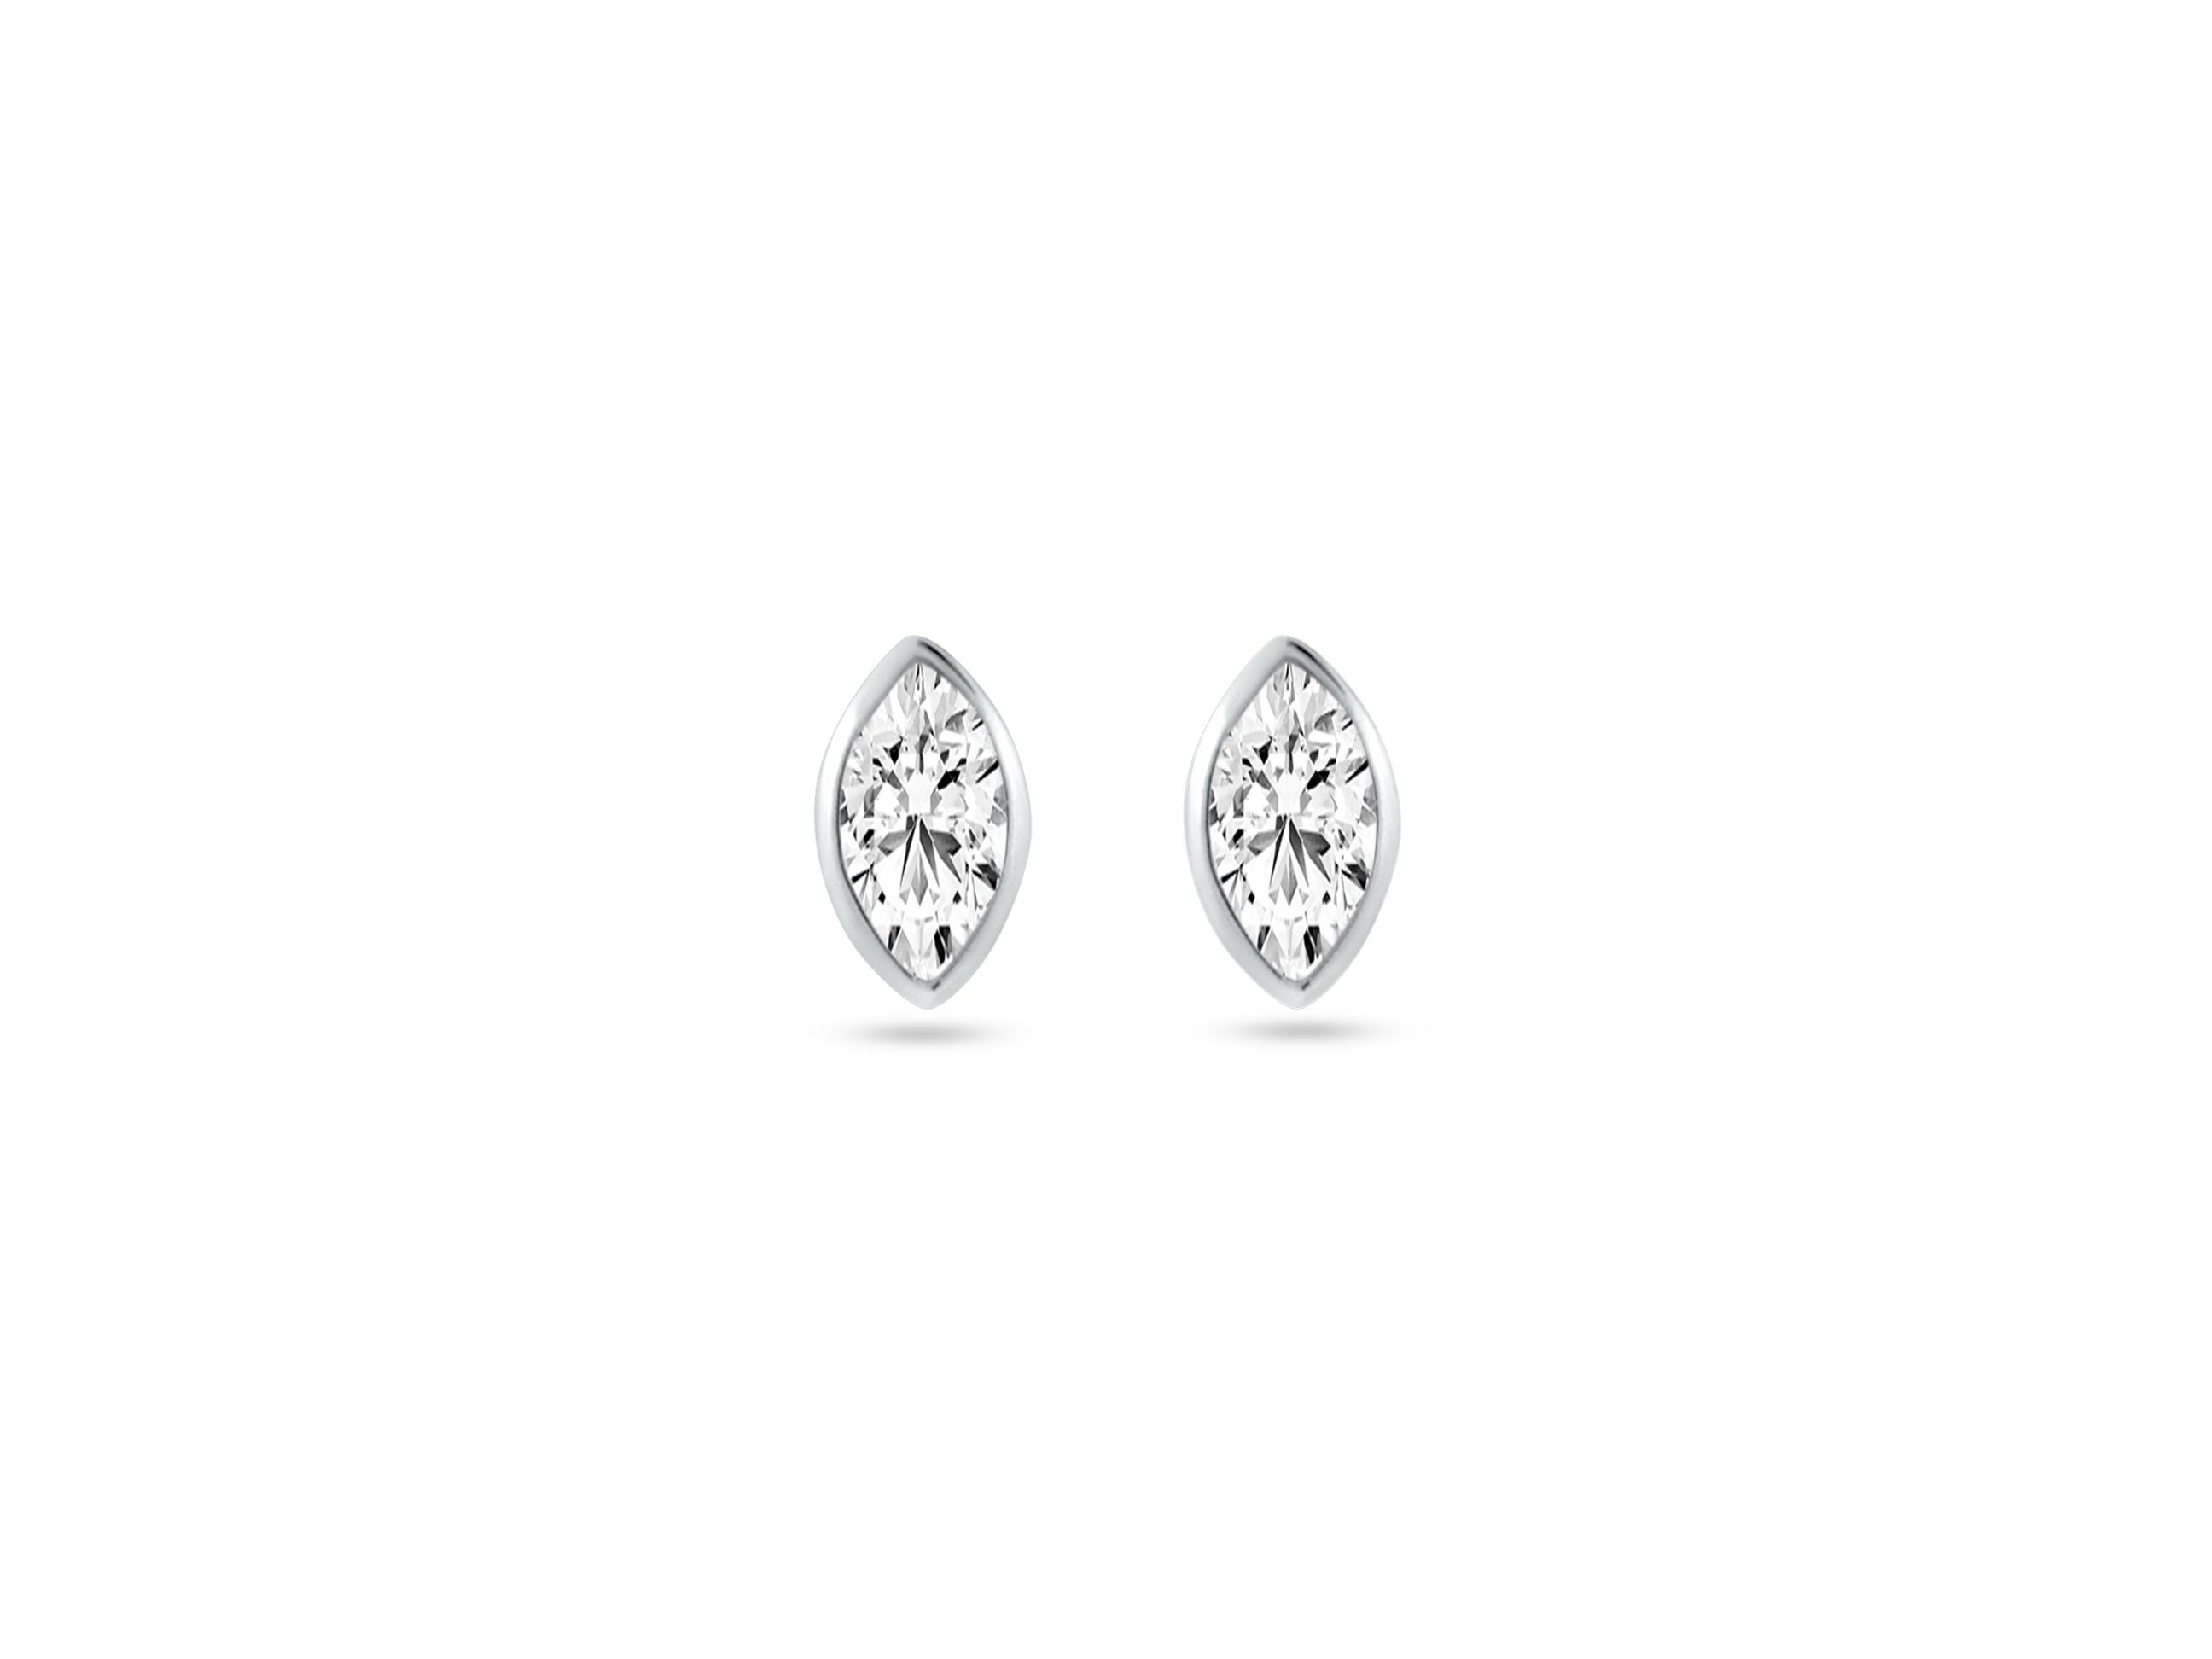 MULLOYS PRIVE'14K WHITE GOLD .21CT SI1 CLARITY G COLOR MARQUIS STUDS